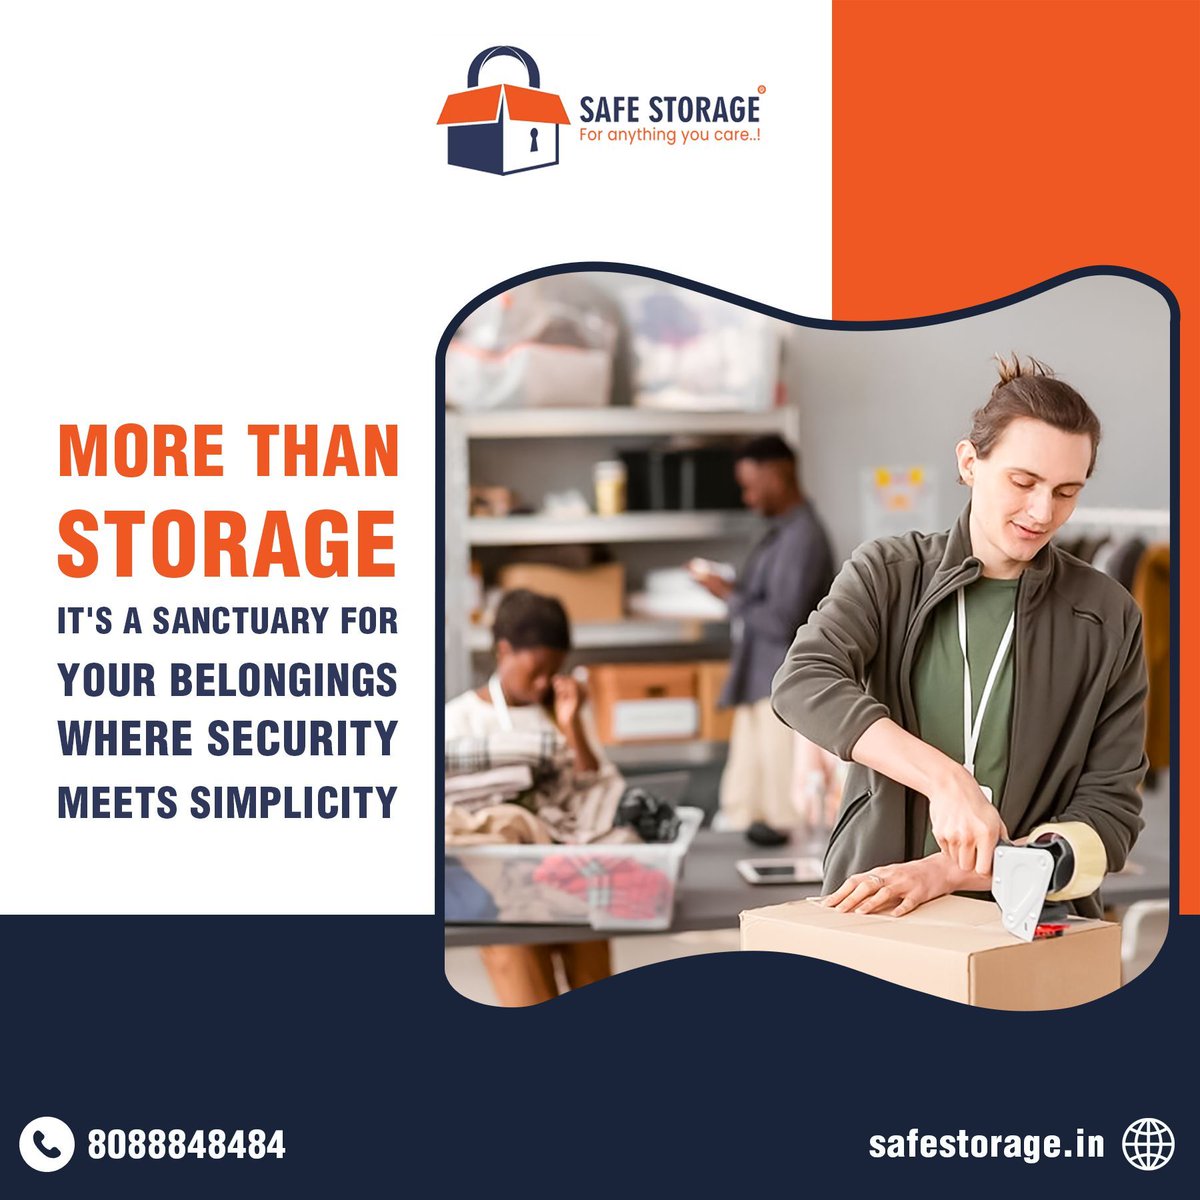 SafeStorage: More than just storage, it's your ultimate sanctuary for belongings. Experience the perfect blend of security and simplicity with us.

Visit our website -buff.ly/2pK6eaM
Call now: 8088848484
#SafeStorage #StorageFacility #SecureStorage #SelfStorage #explore